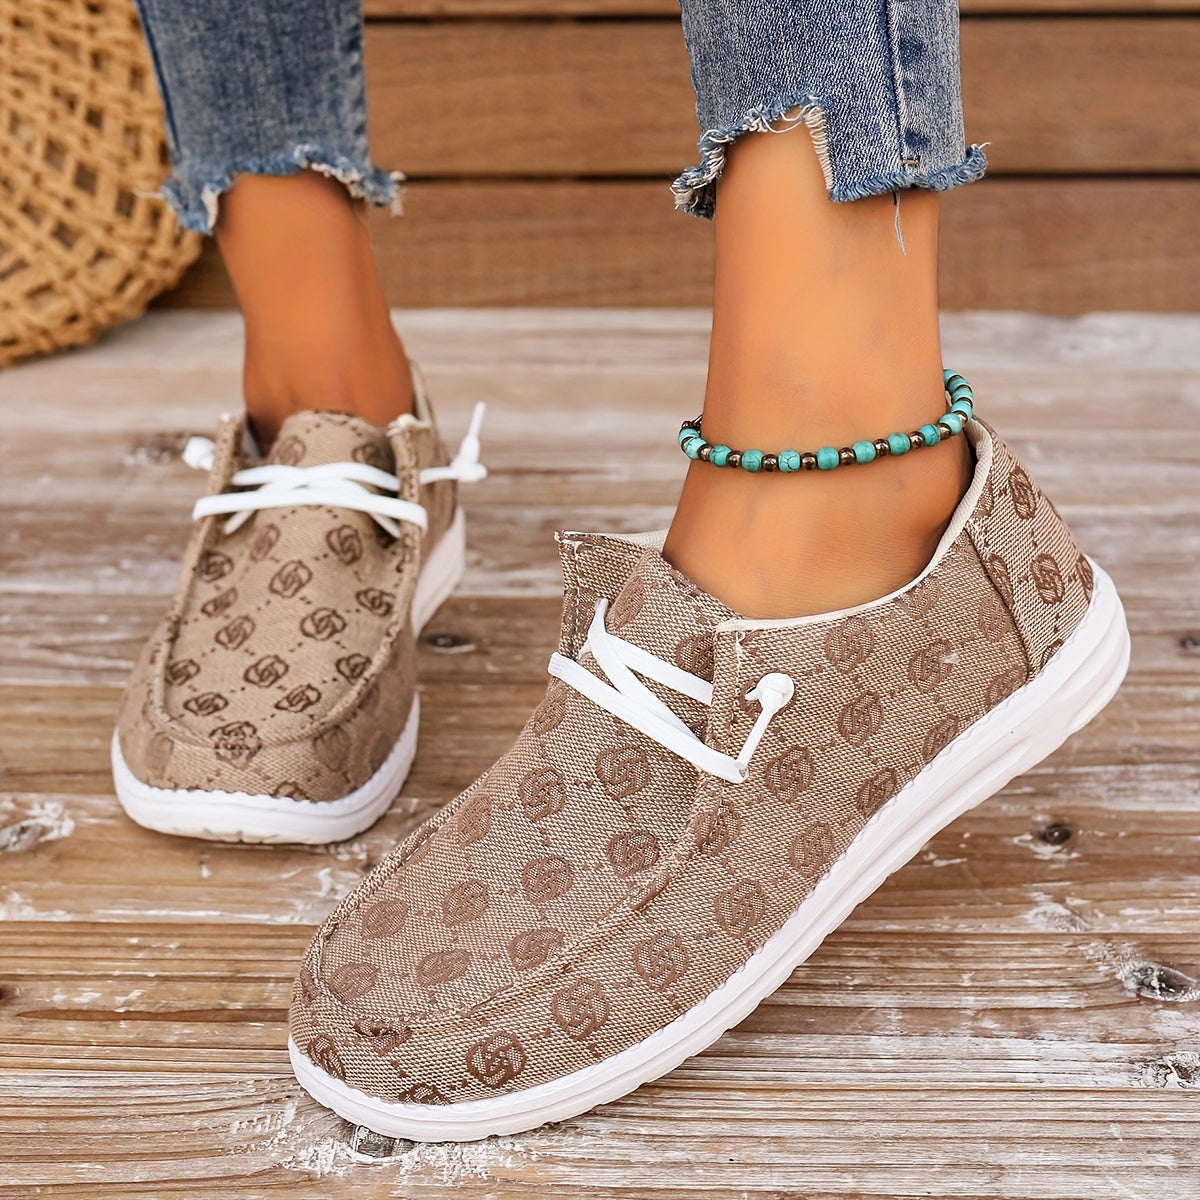 Flower Pattern Canvas Shoes, Round Toe Slip On Flat Loafers